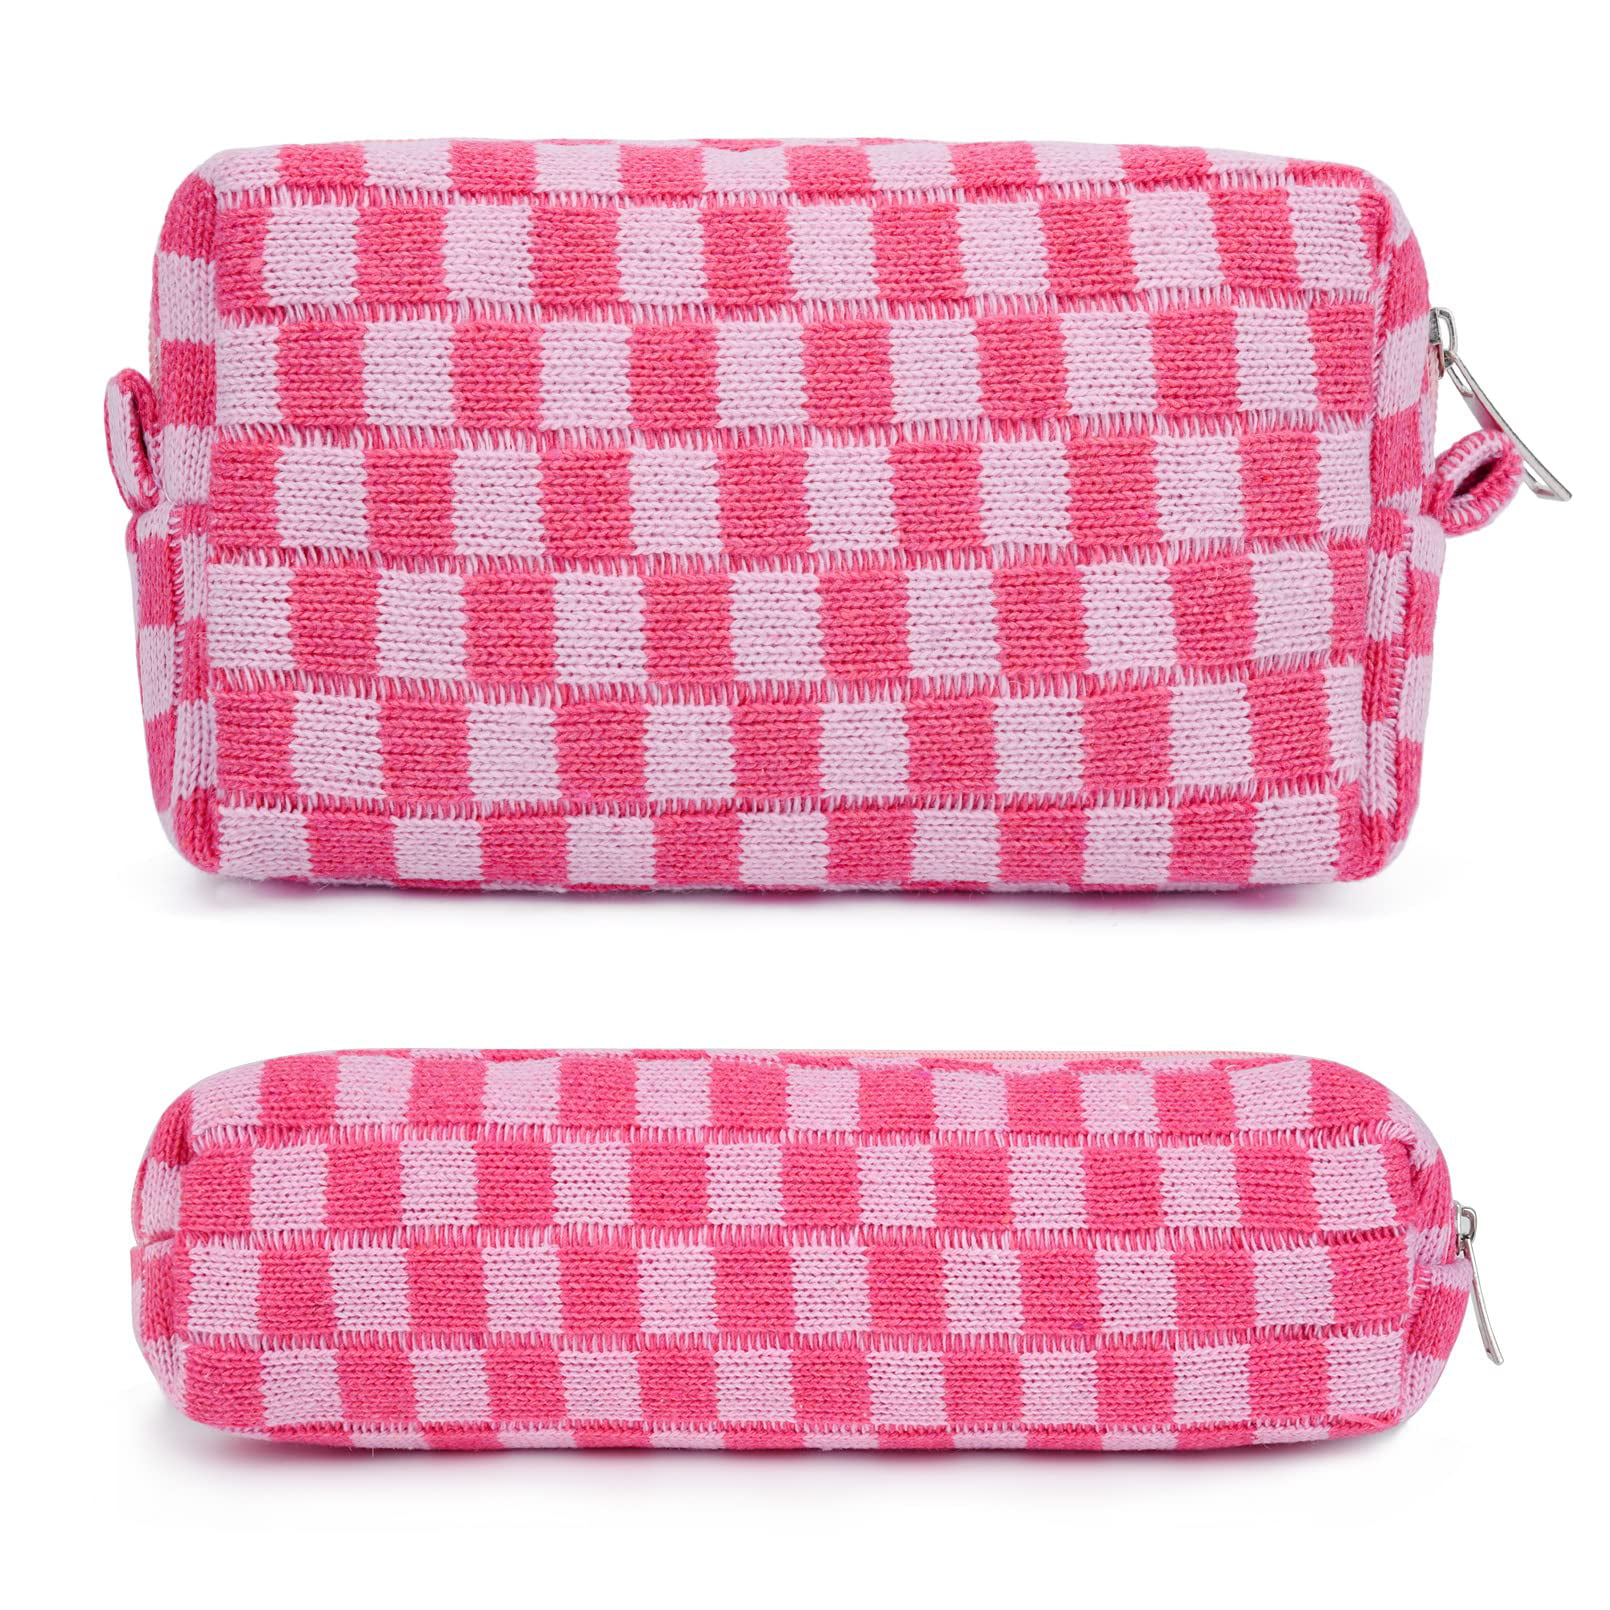 PAZIMIIK Checkered Makeup Bag for Purse Portable Zipper Make Up Pouch Small  Cosmetic Case for Travel Accessories (2PCS Blue Hotpink)